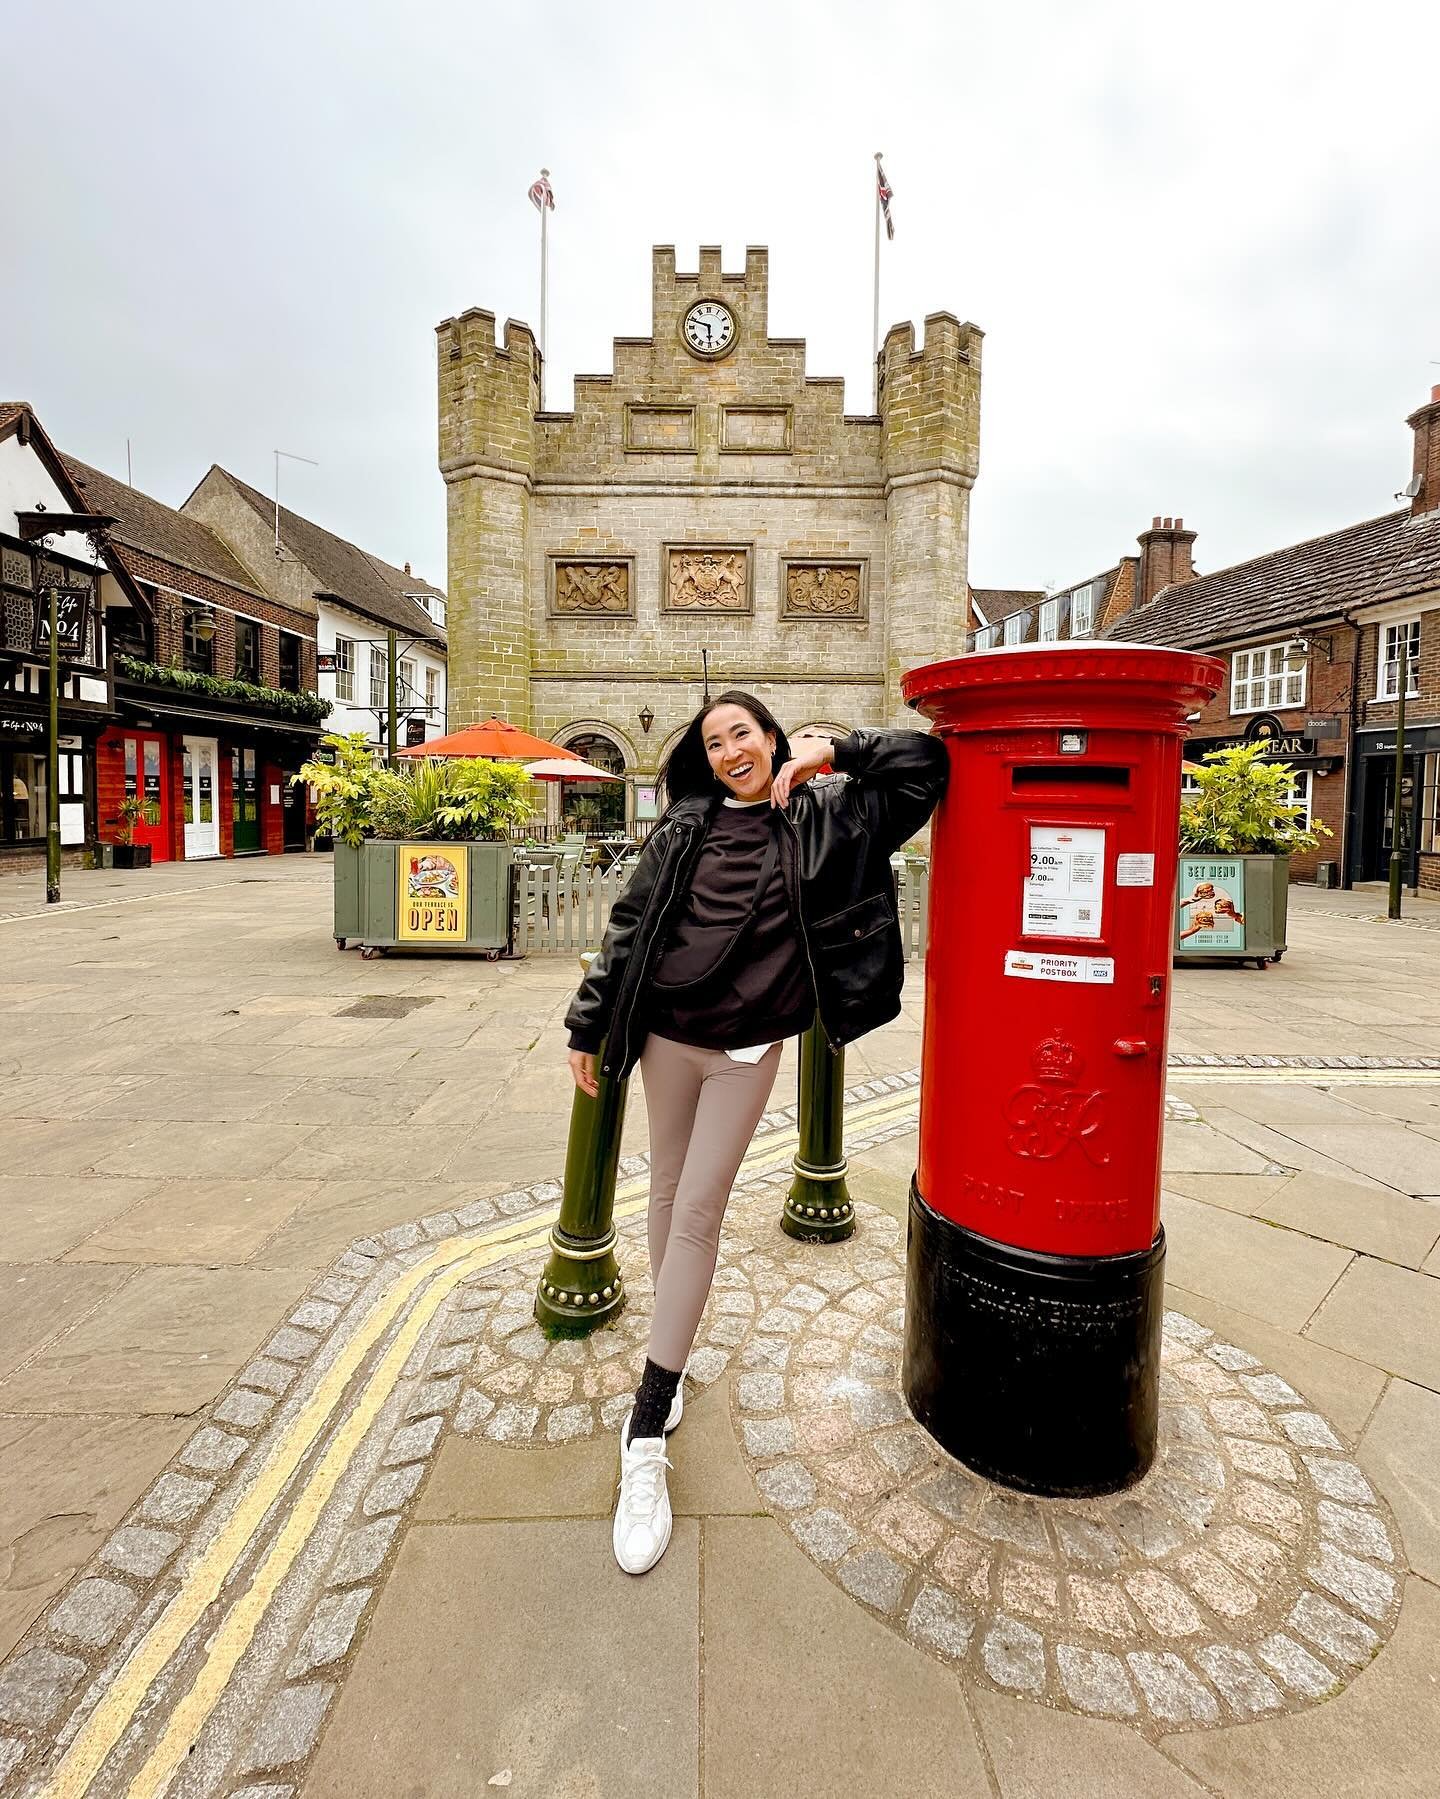 a day in #brightonuk and #horsham! I&rsquo;m pictured in front of the old town hall that dates back to 1812, and erected by the #DukeofNorfolk on the site of the Former market House which had stood there for 300 years. I also found ye old post box ne